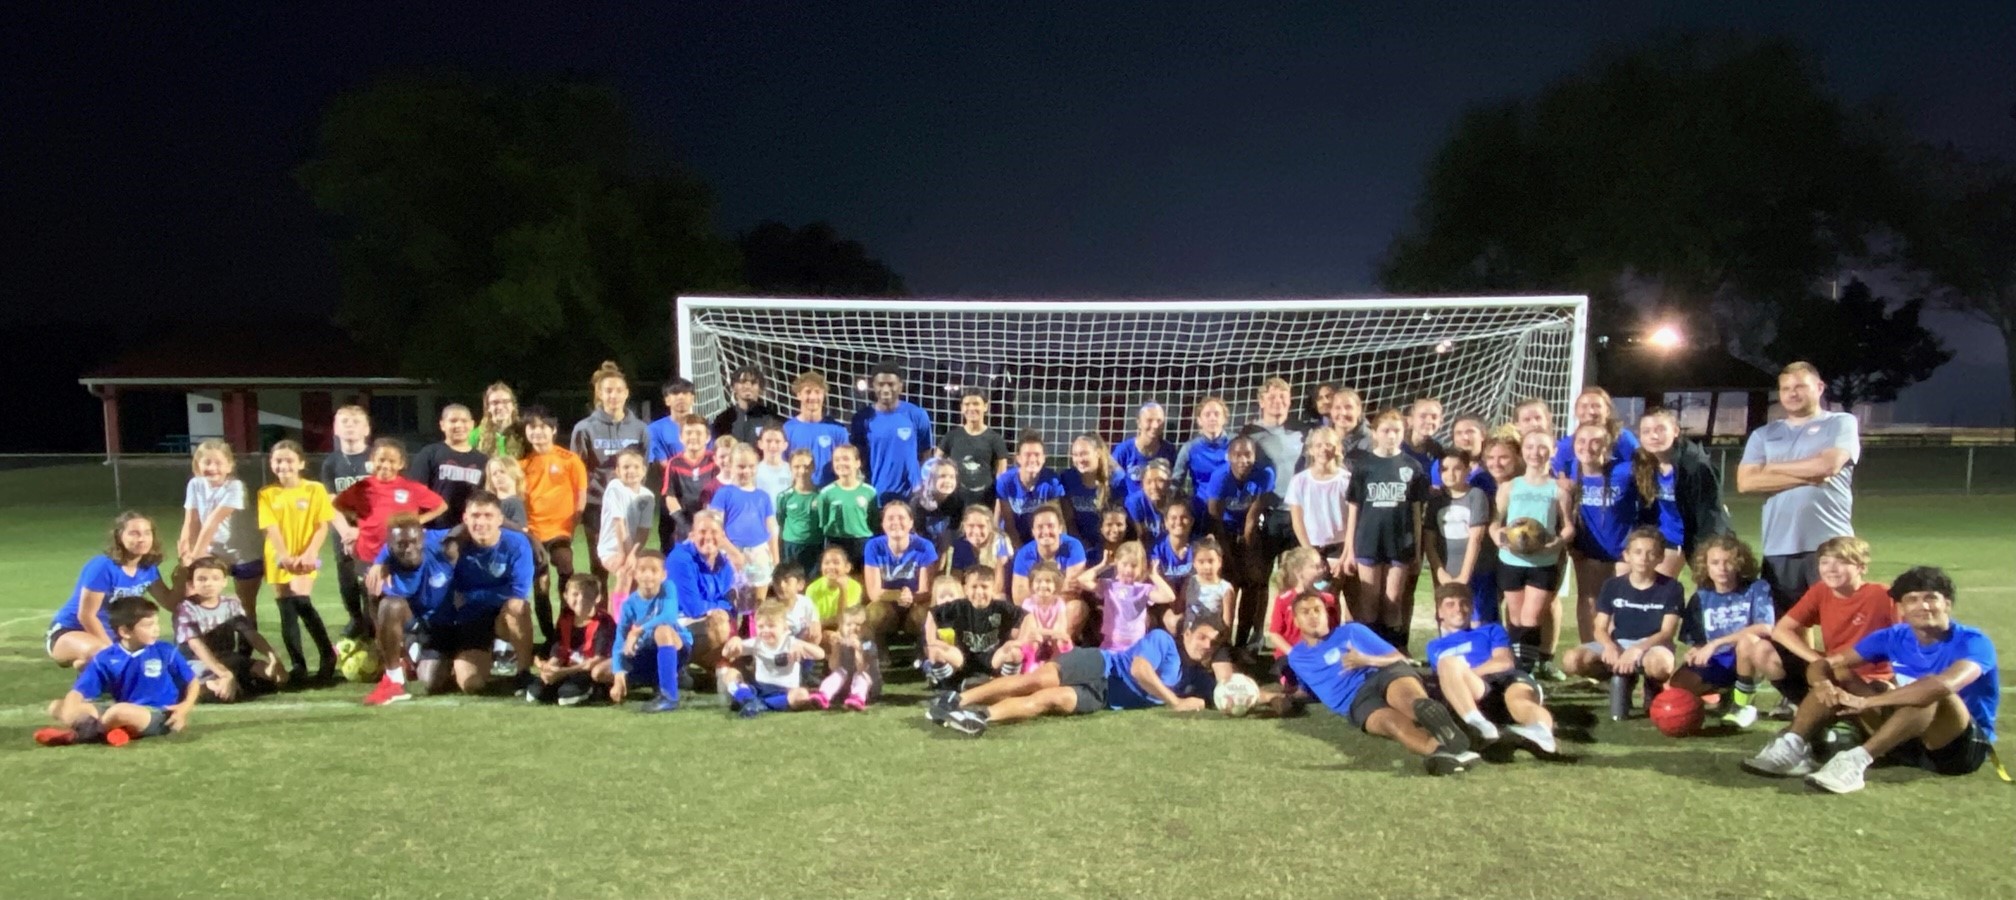 Daytona State Men’s and Women’s Soccer Teams Provide Youth Soccer Clinic for Ormond Beach Soccer Club